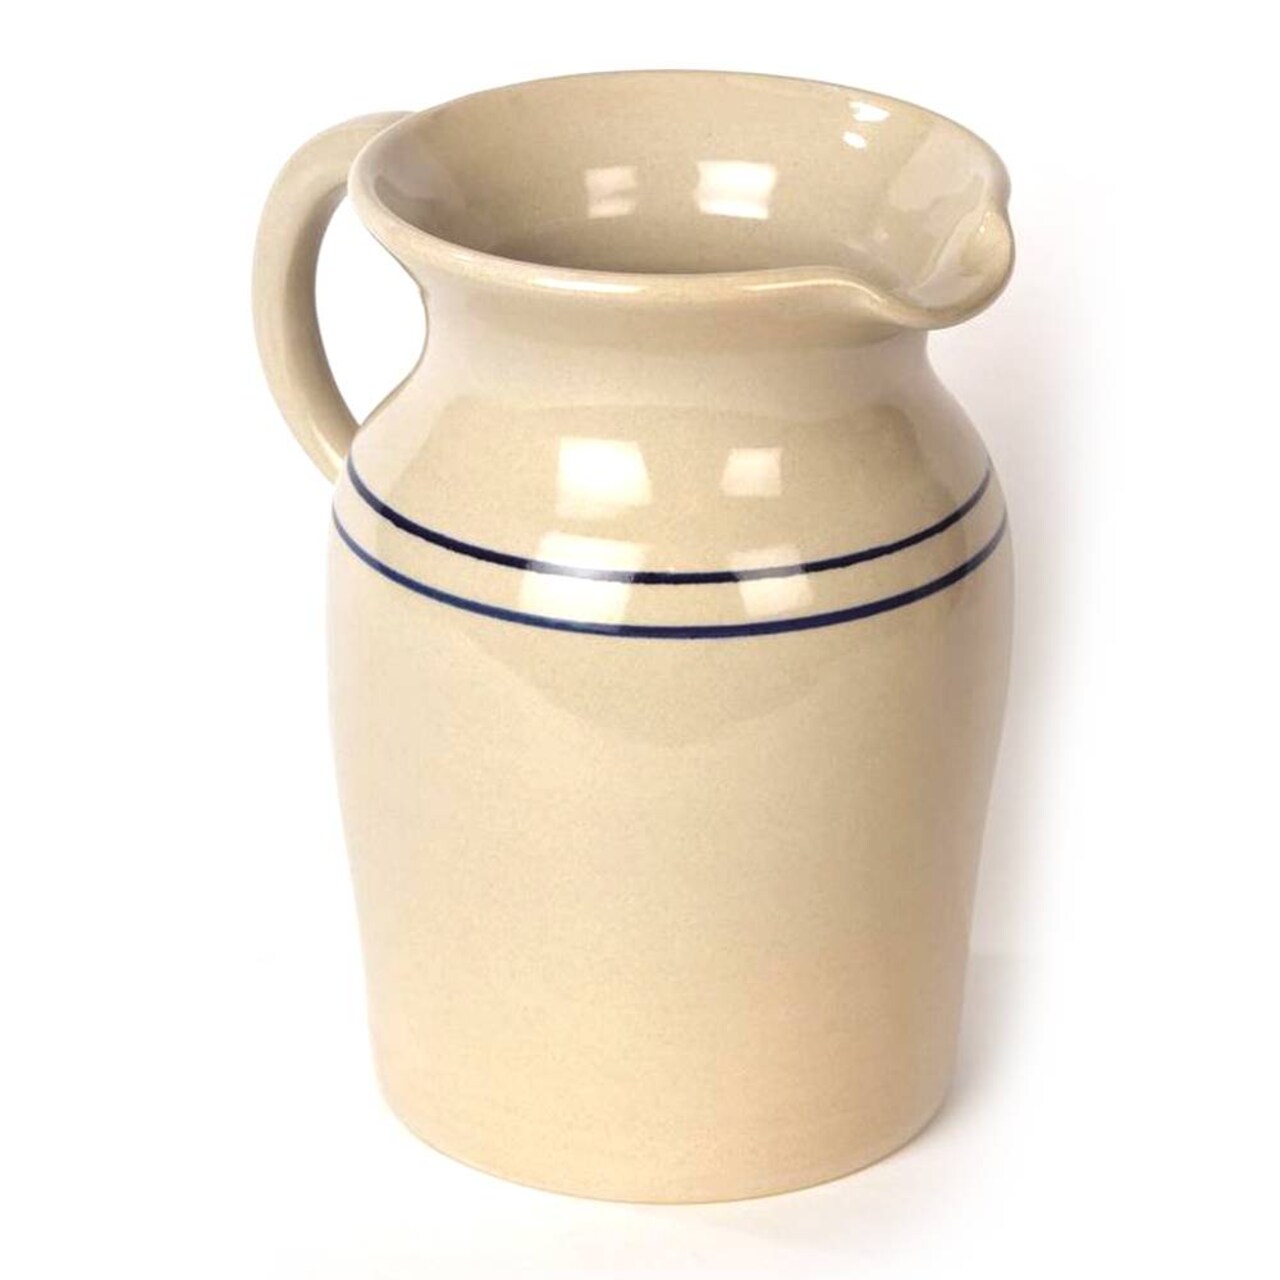 Martinez Pottery Stoneware Pitcher Vase, Natural with Blue Stripe Country D&#xE9;cor